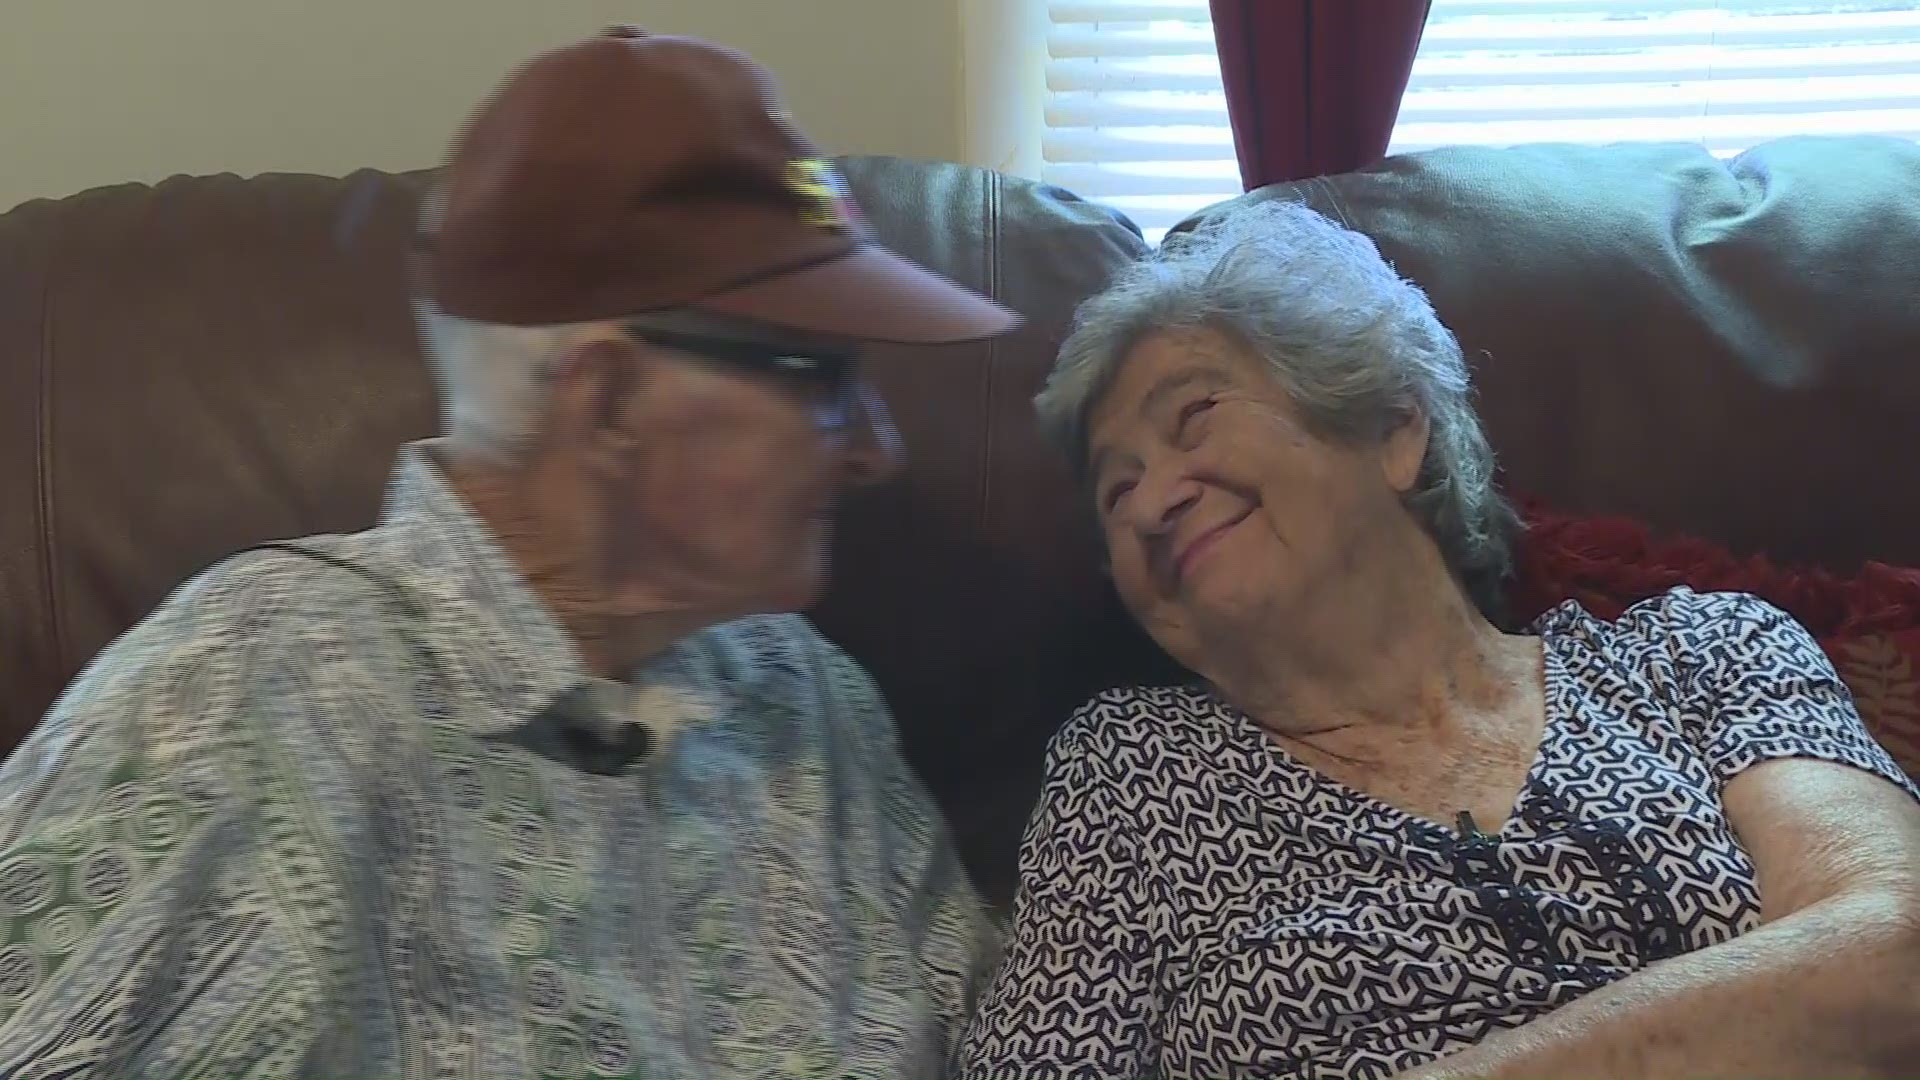 For 70 years, this couple remained married, in love, and full of life.